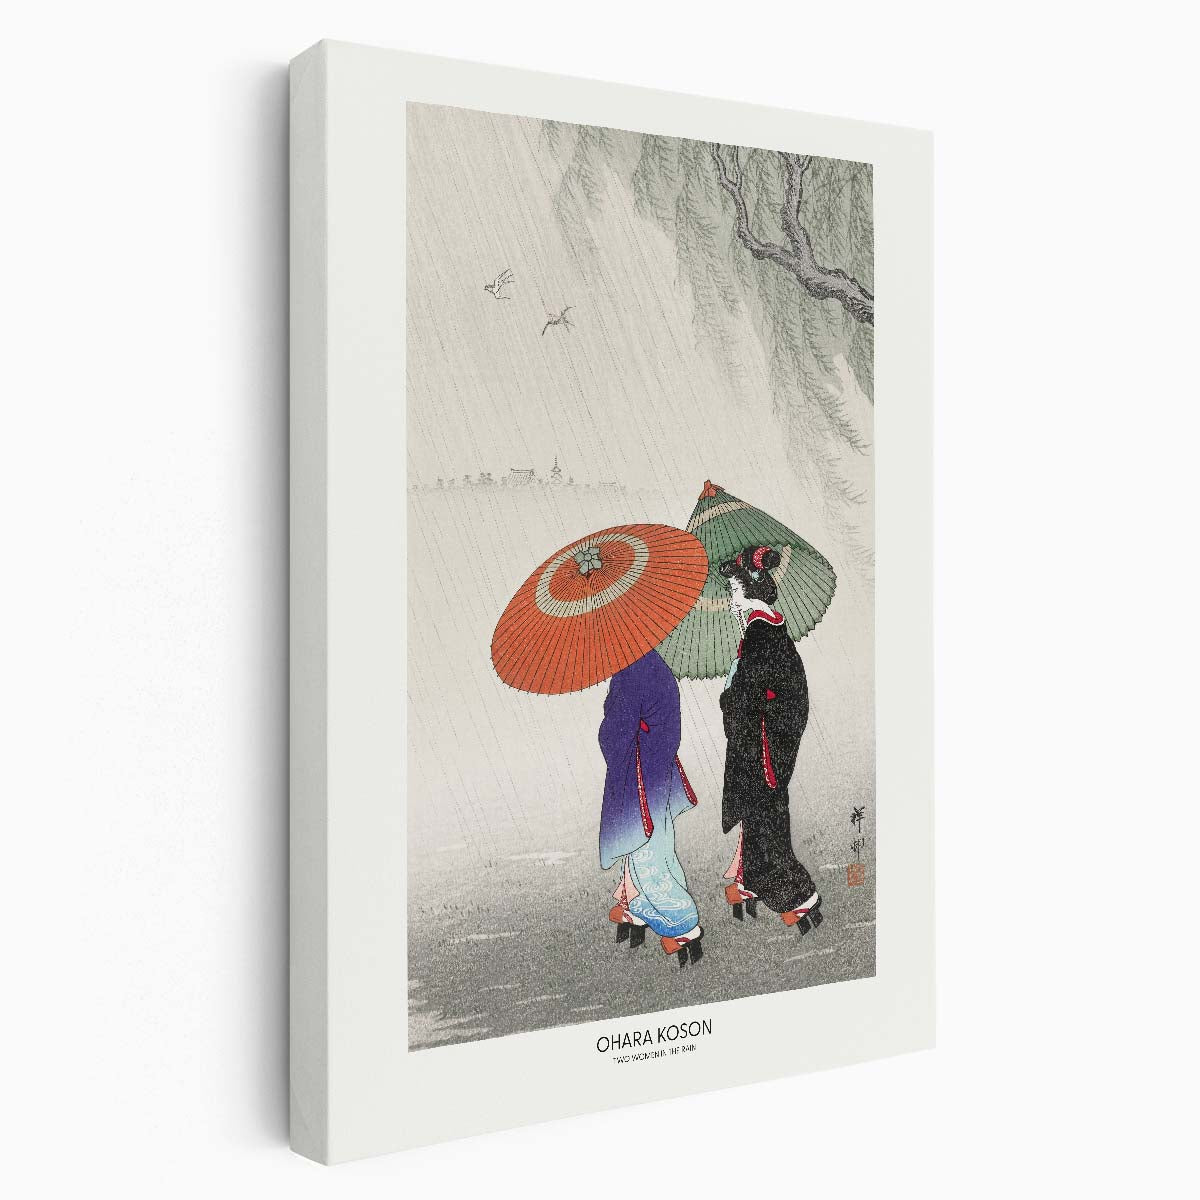 Vintage Japanese Art - Ohara Koson Rainy Duo Illustration by Luxuriance Designs, made in USA